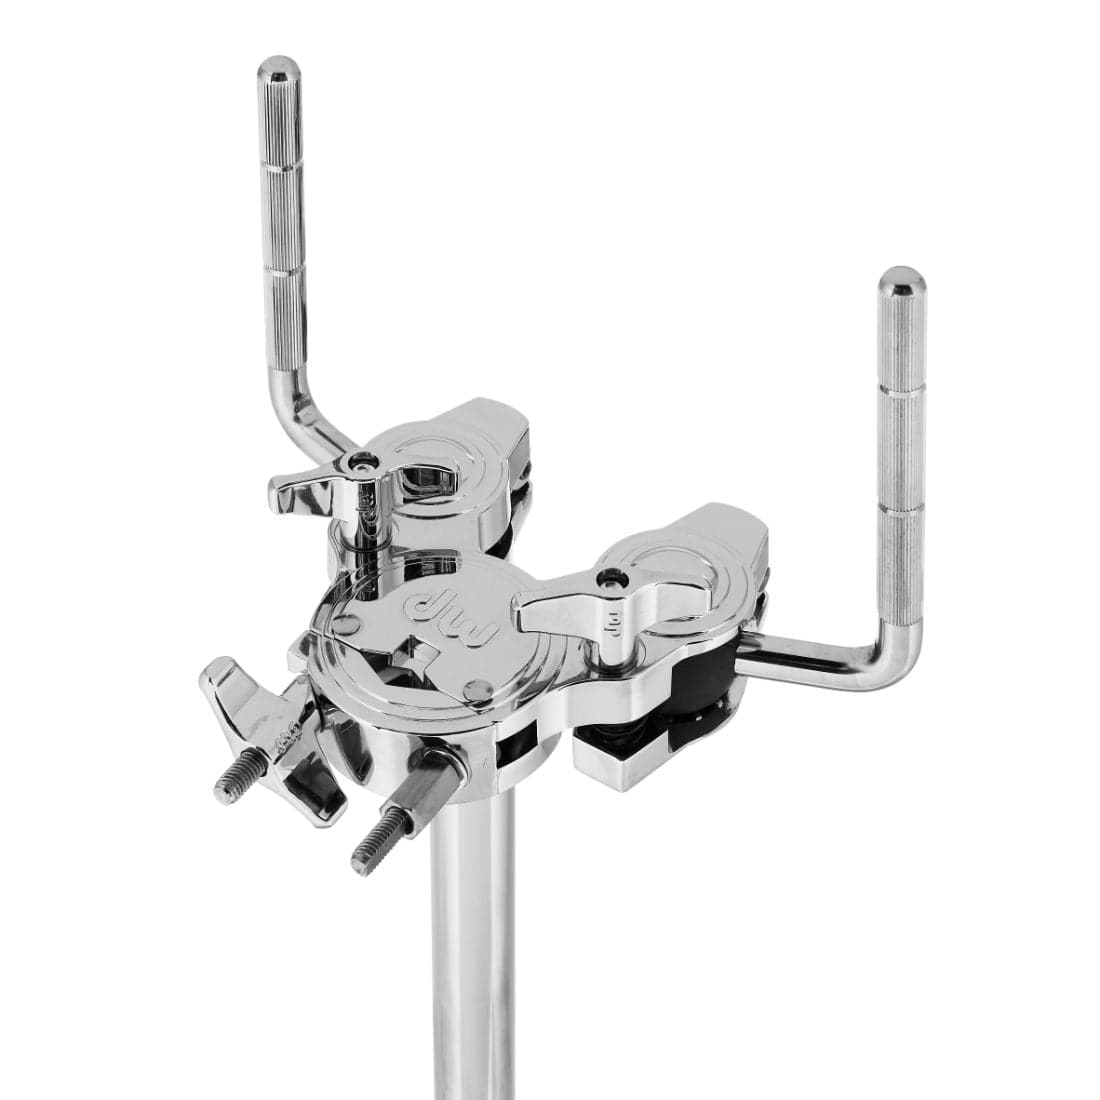 DW 9000 Series Double Tom Stand w/934 Cymbal Boom Arm